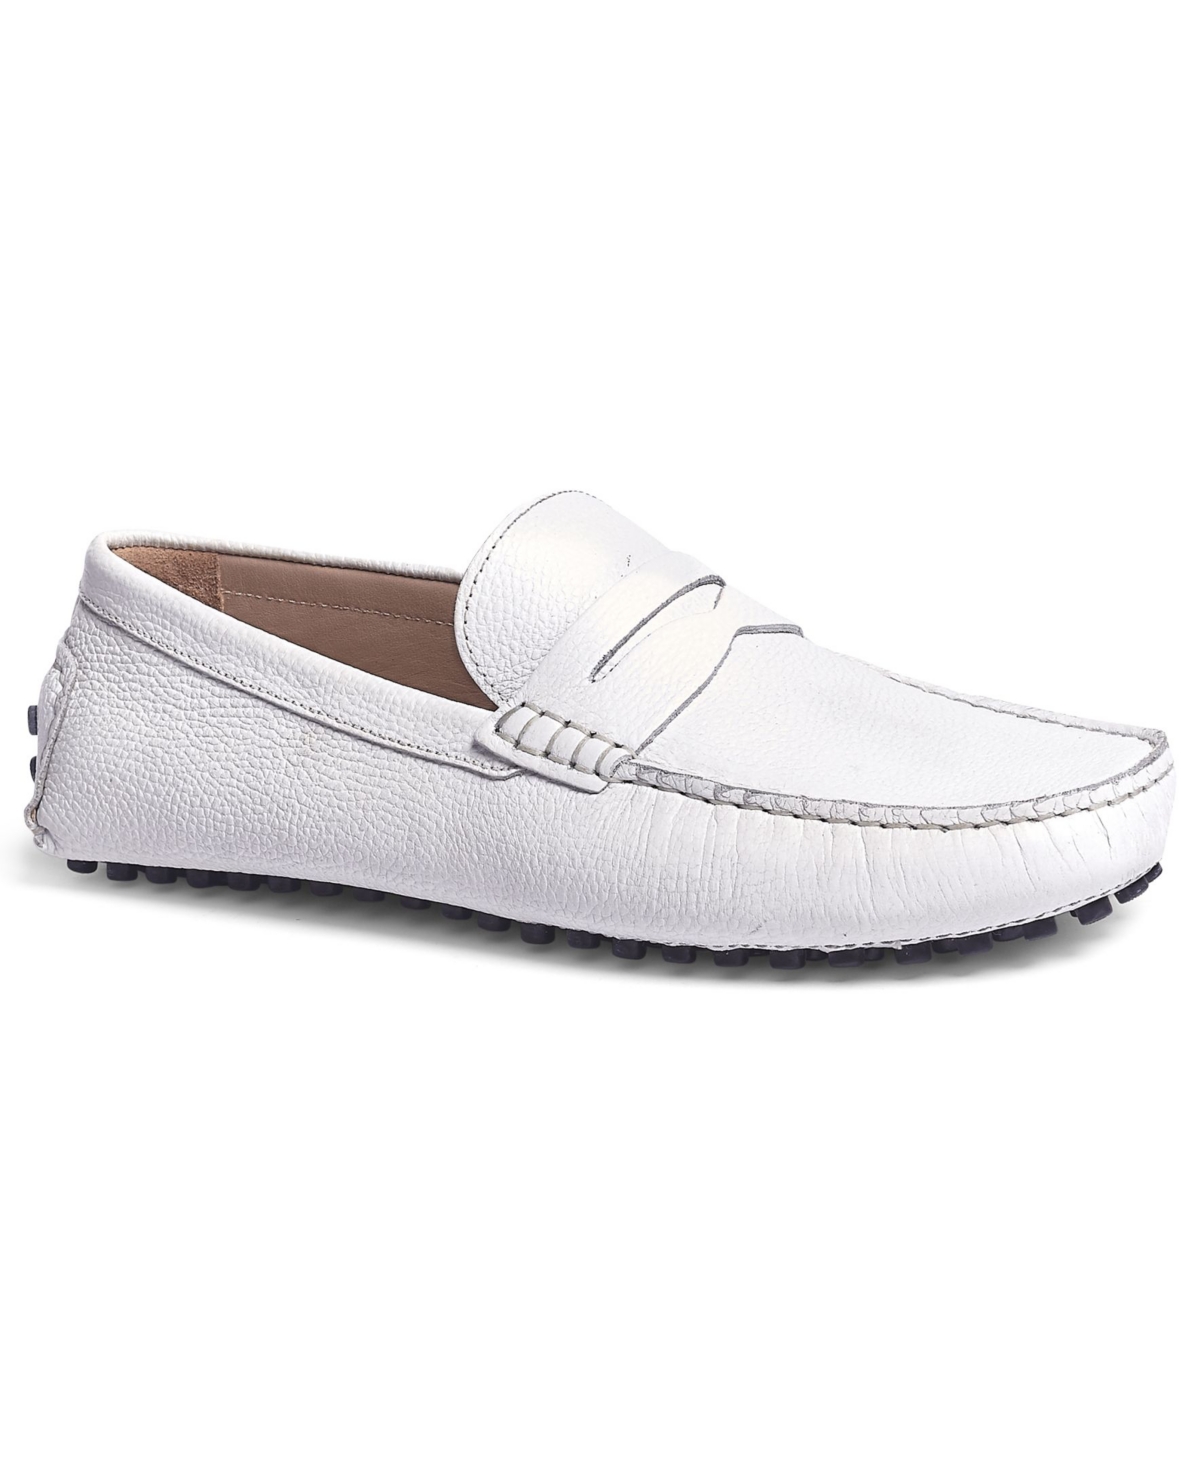 Men's Ritchie Penny Loafer Shoes - White